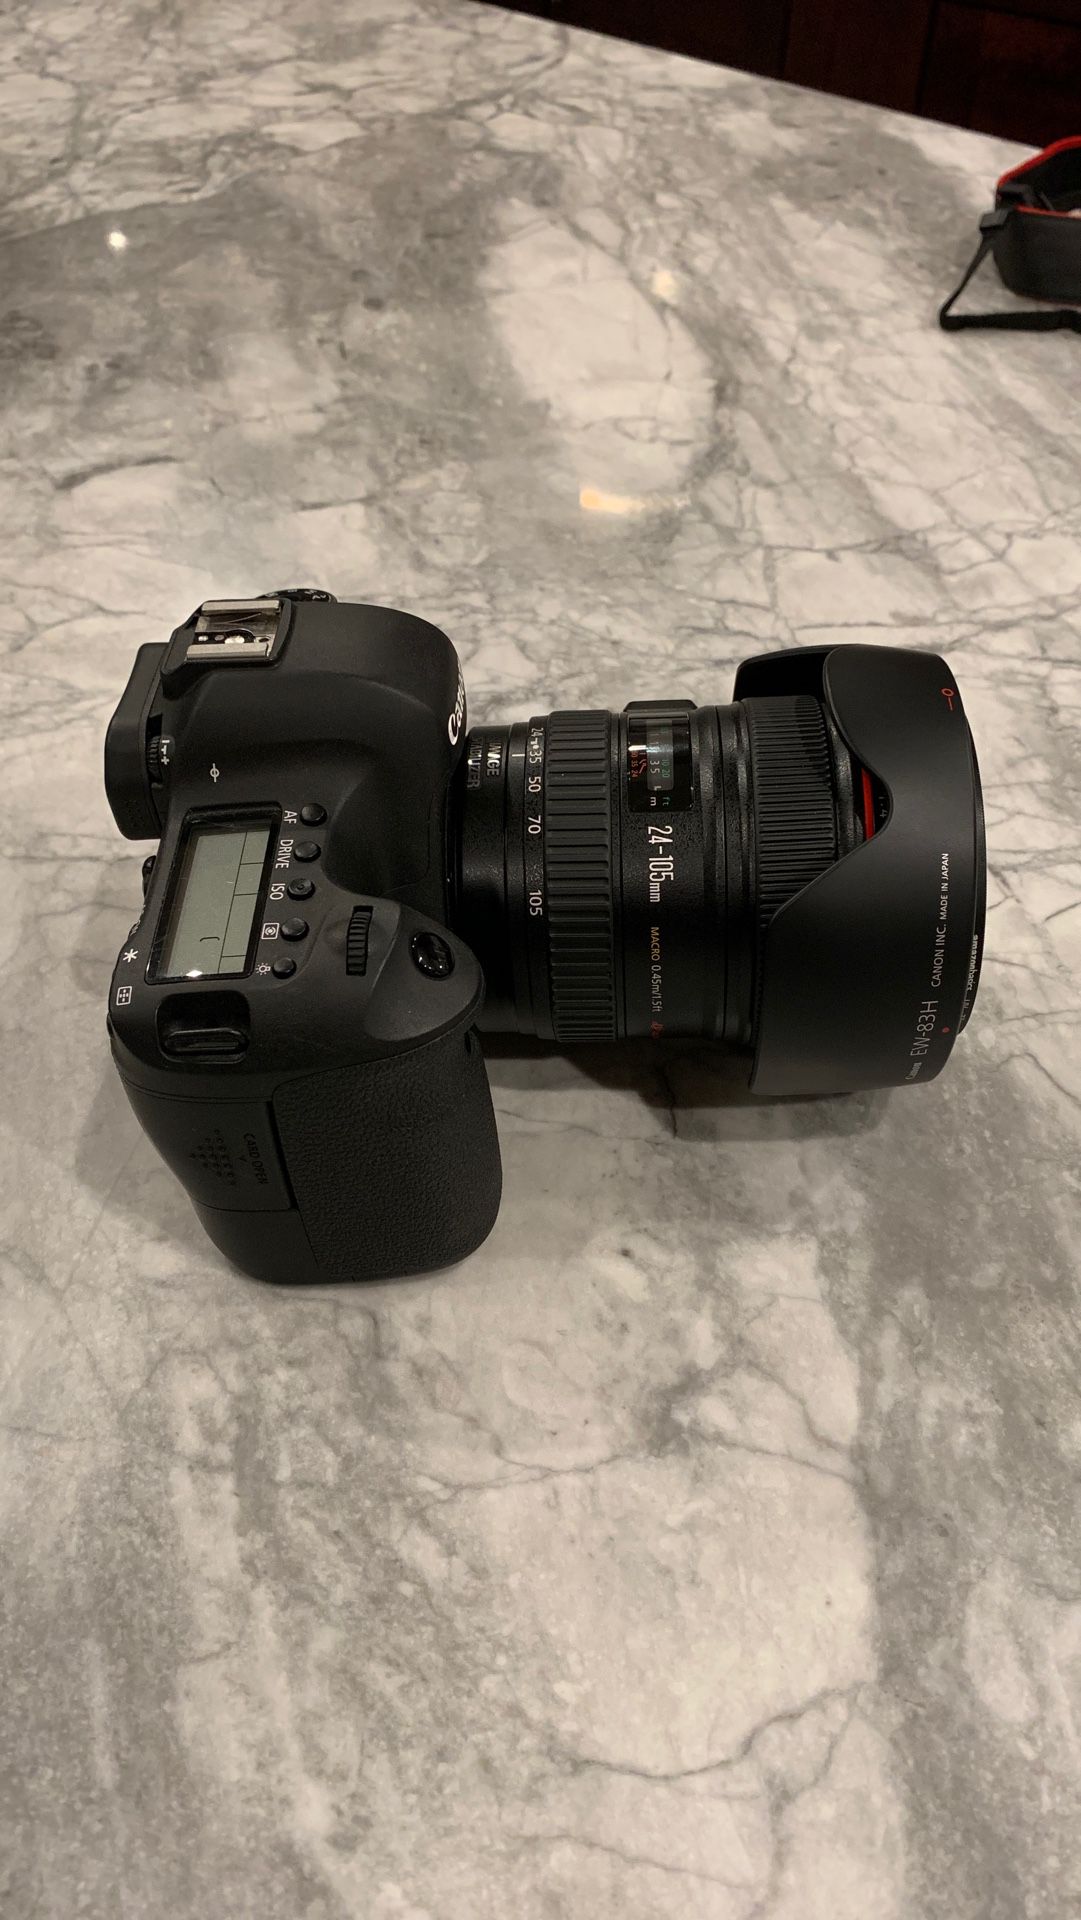 Canon 6D with 24-105 f/4L IS USM lens